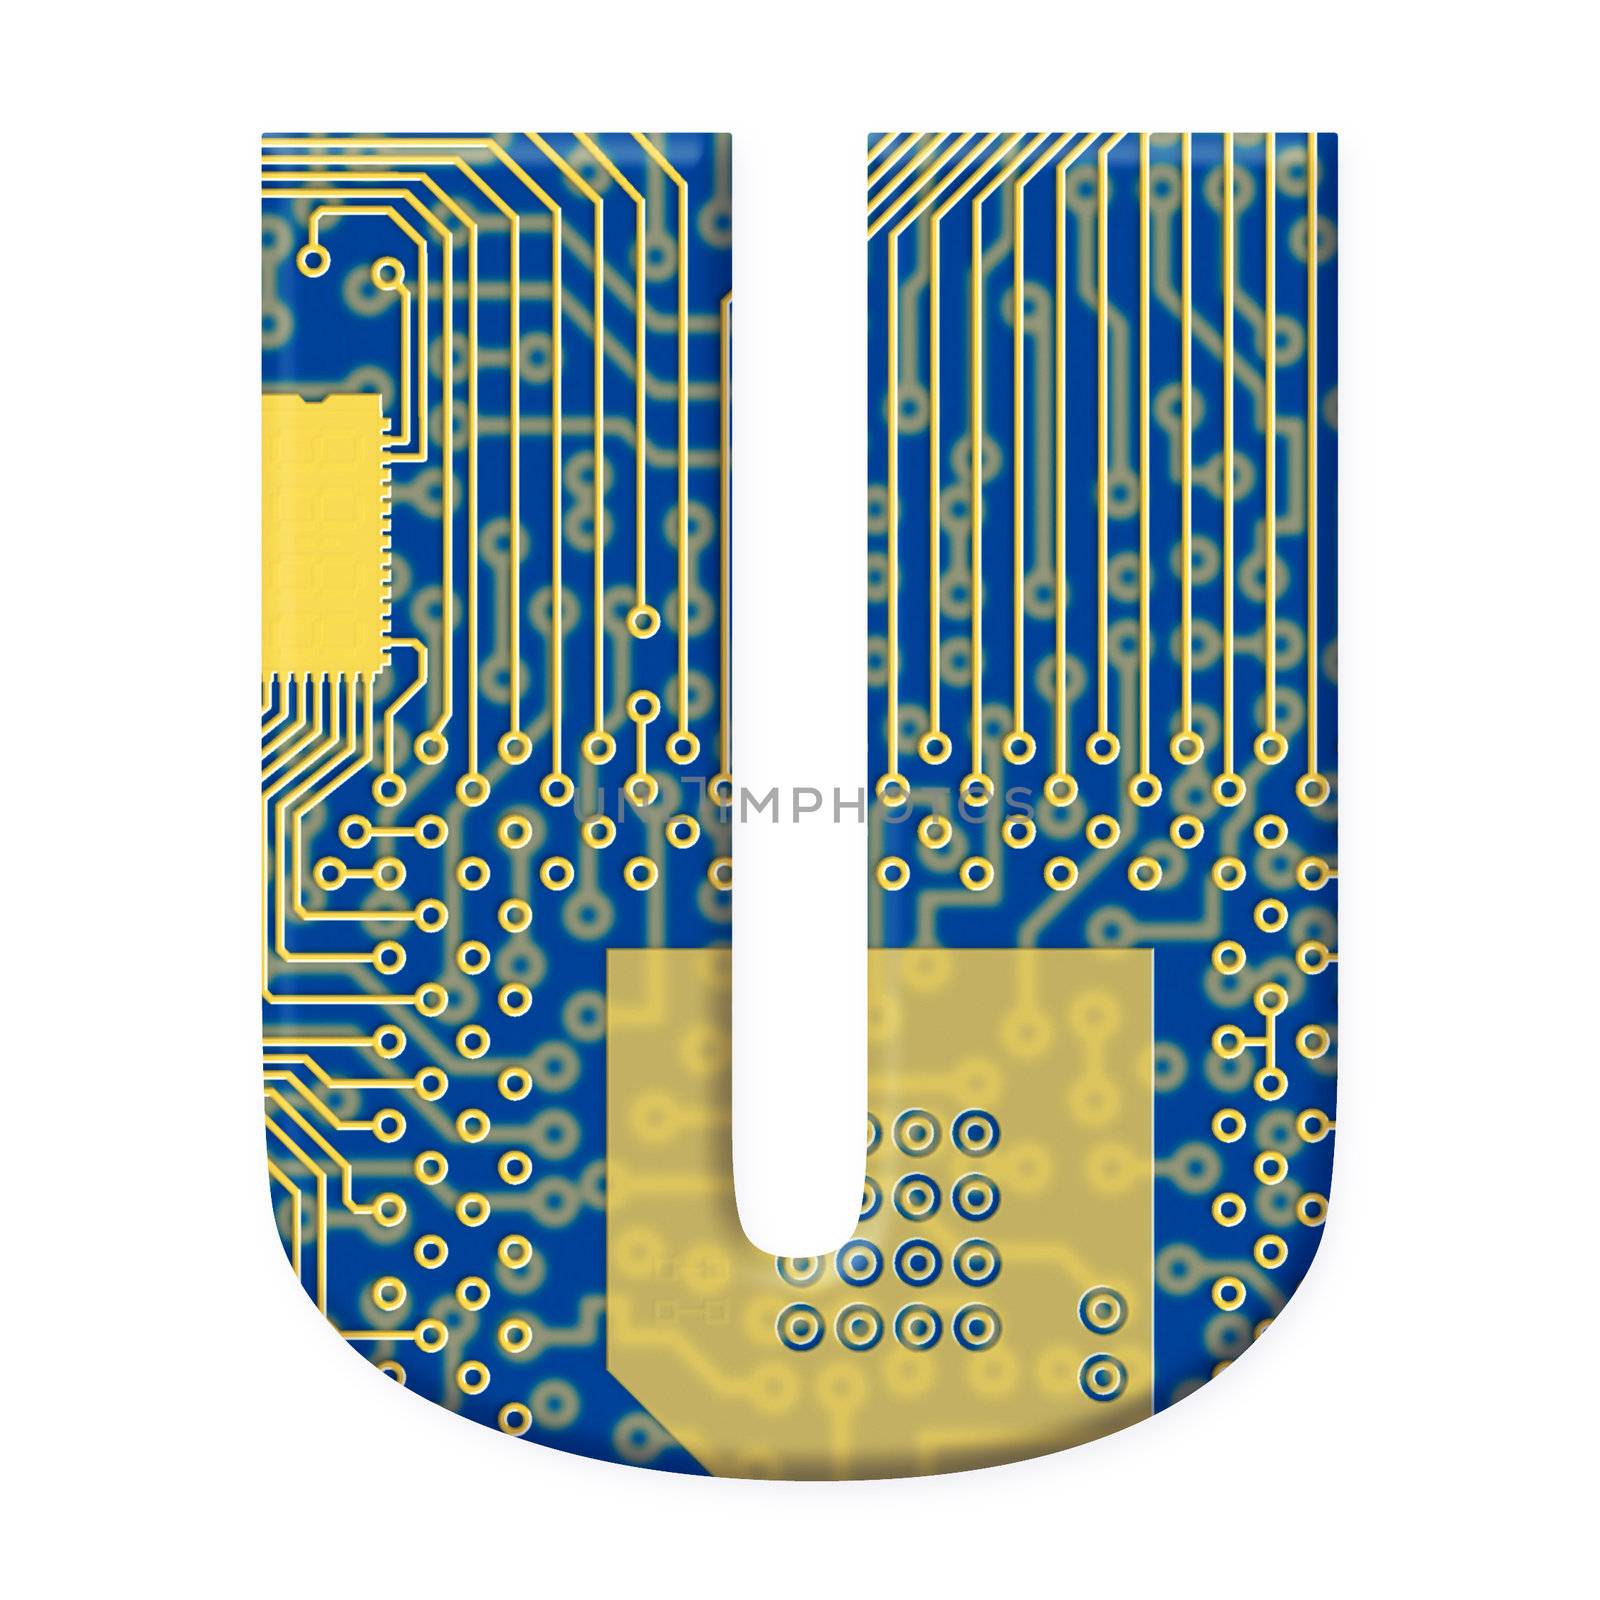 One letter from the electronic technology circuit board alphabet on a white background - U